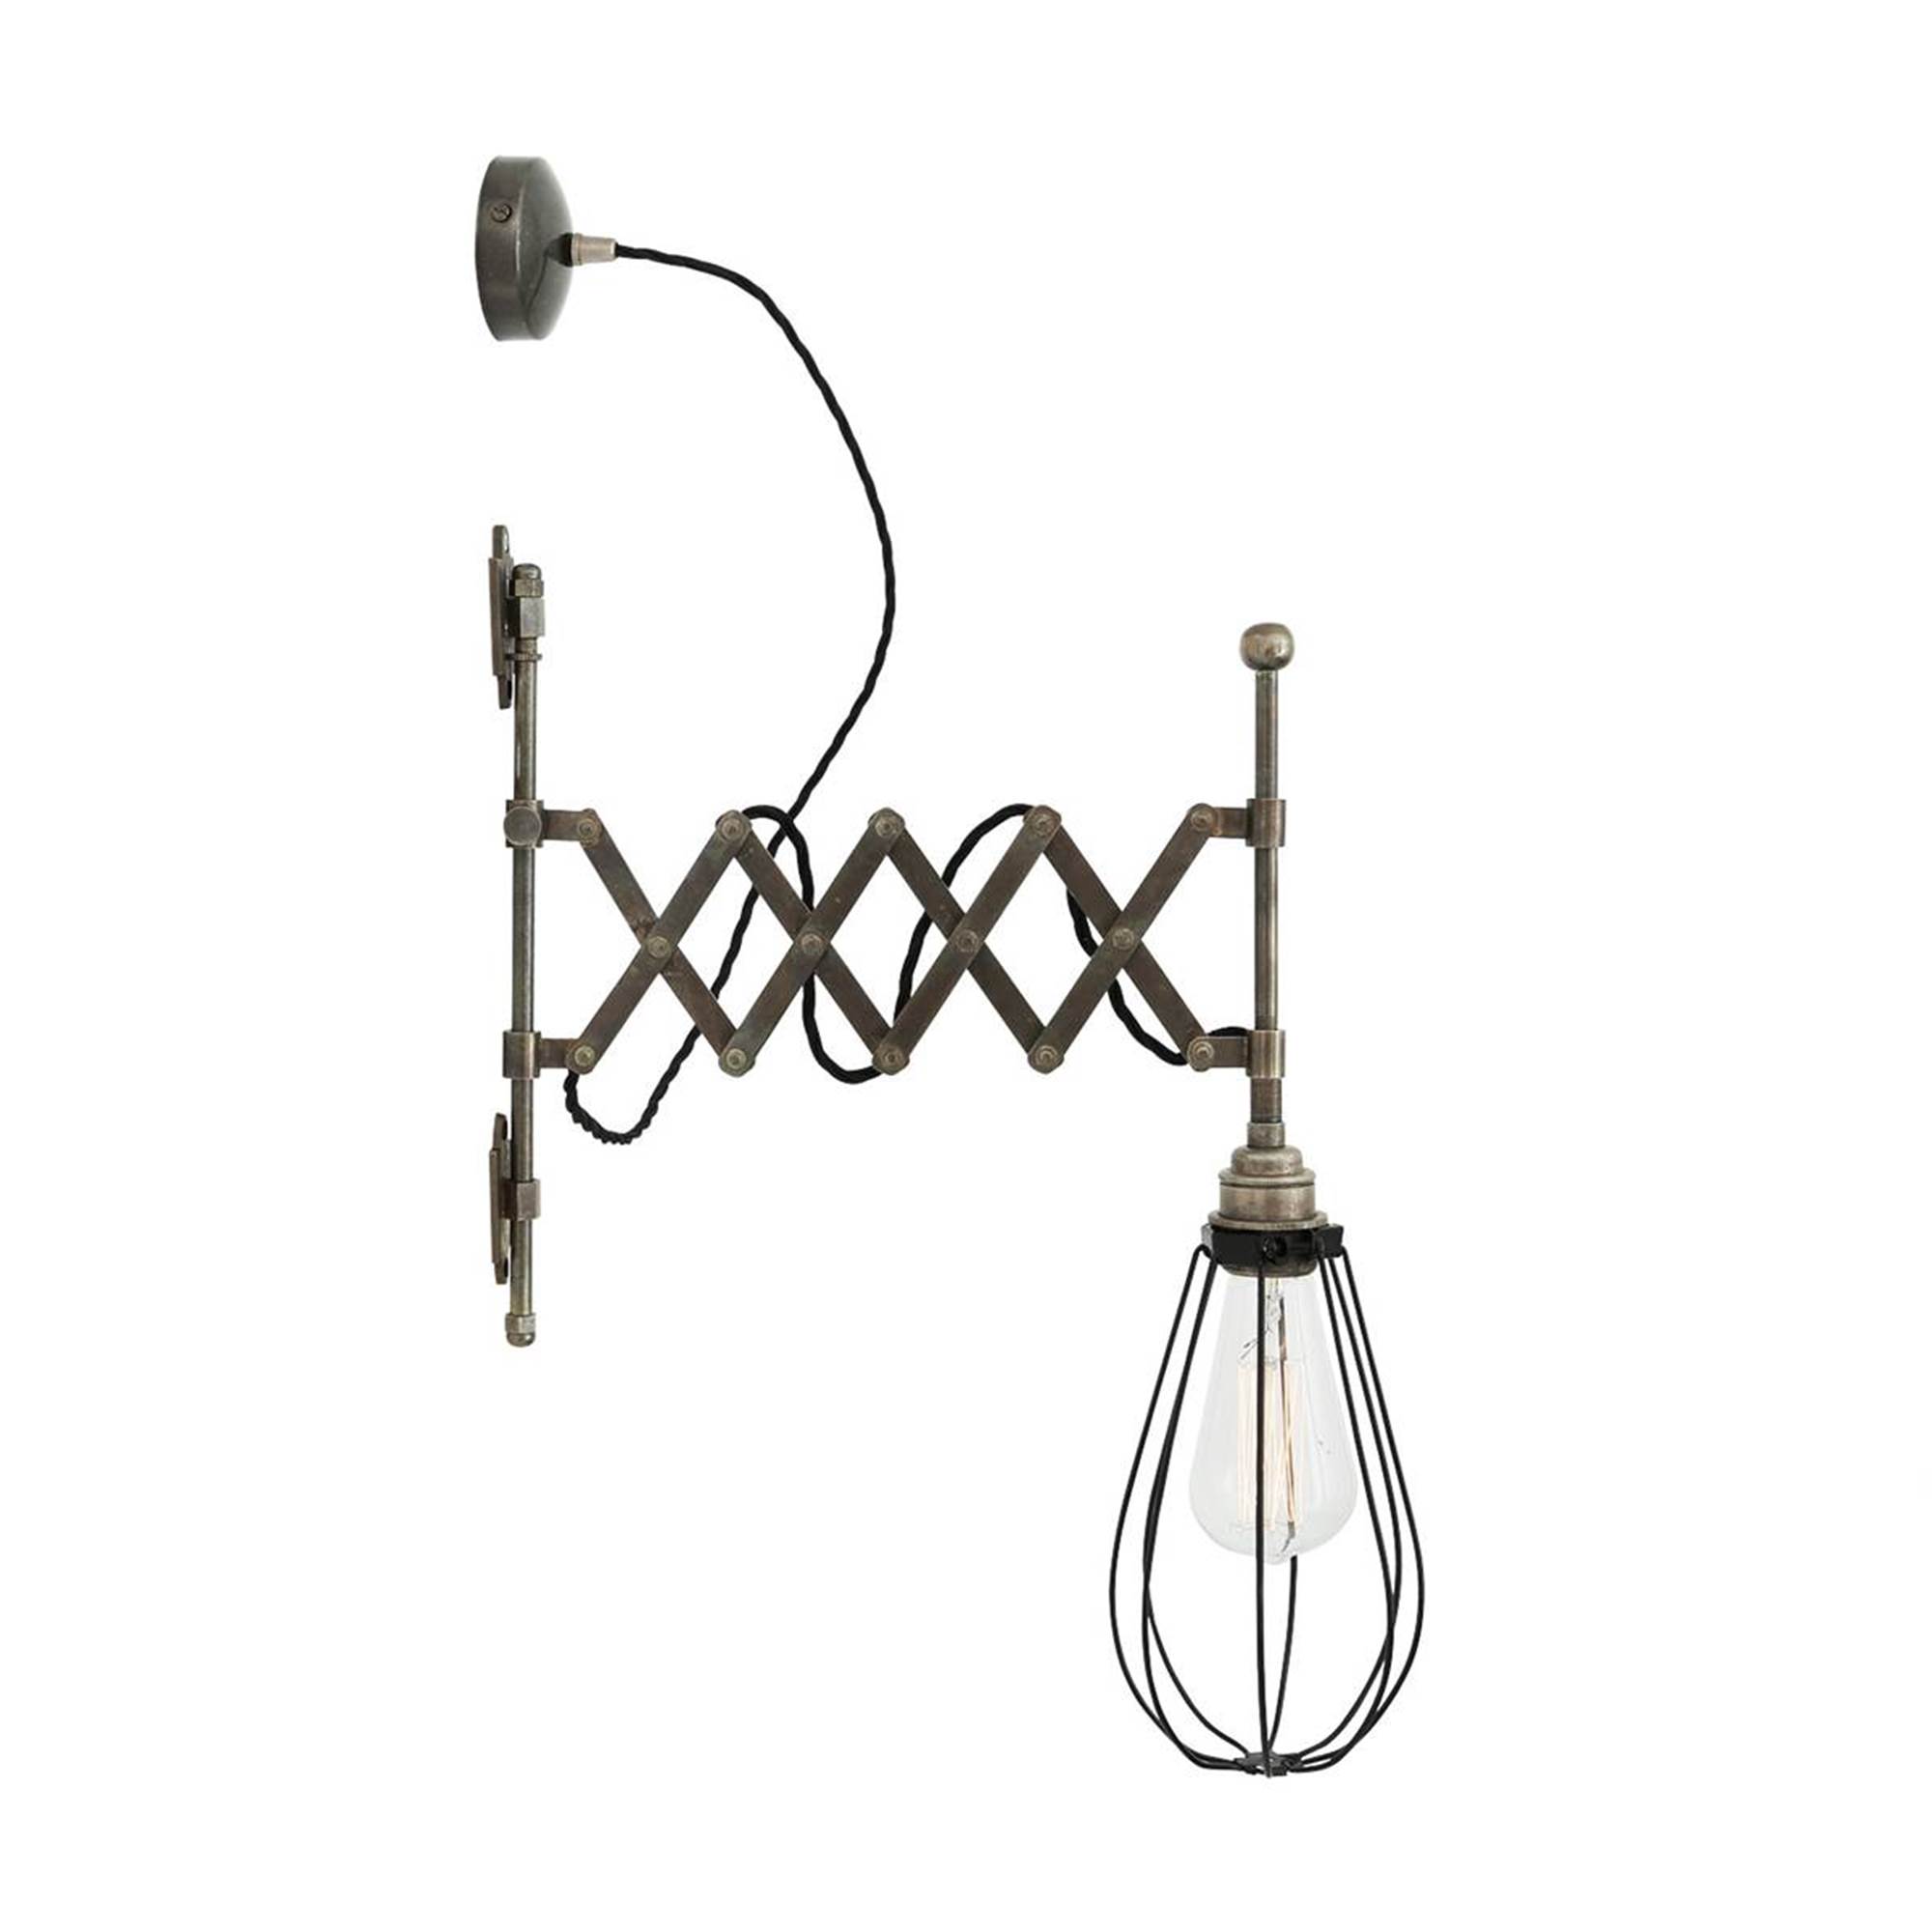 Mullan Lighting Calis Adjustable Wall Light with Scissor Arm Cage - Antique  Silver